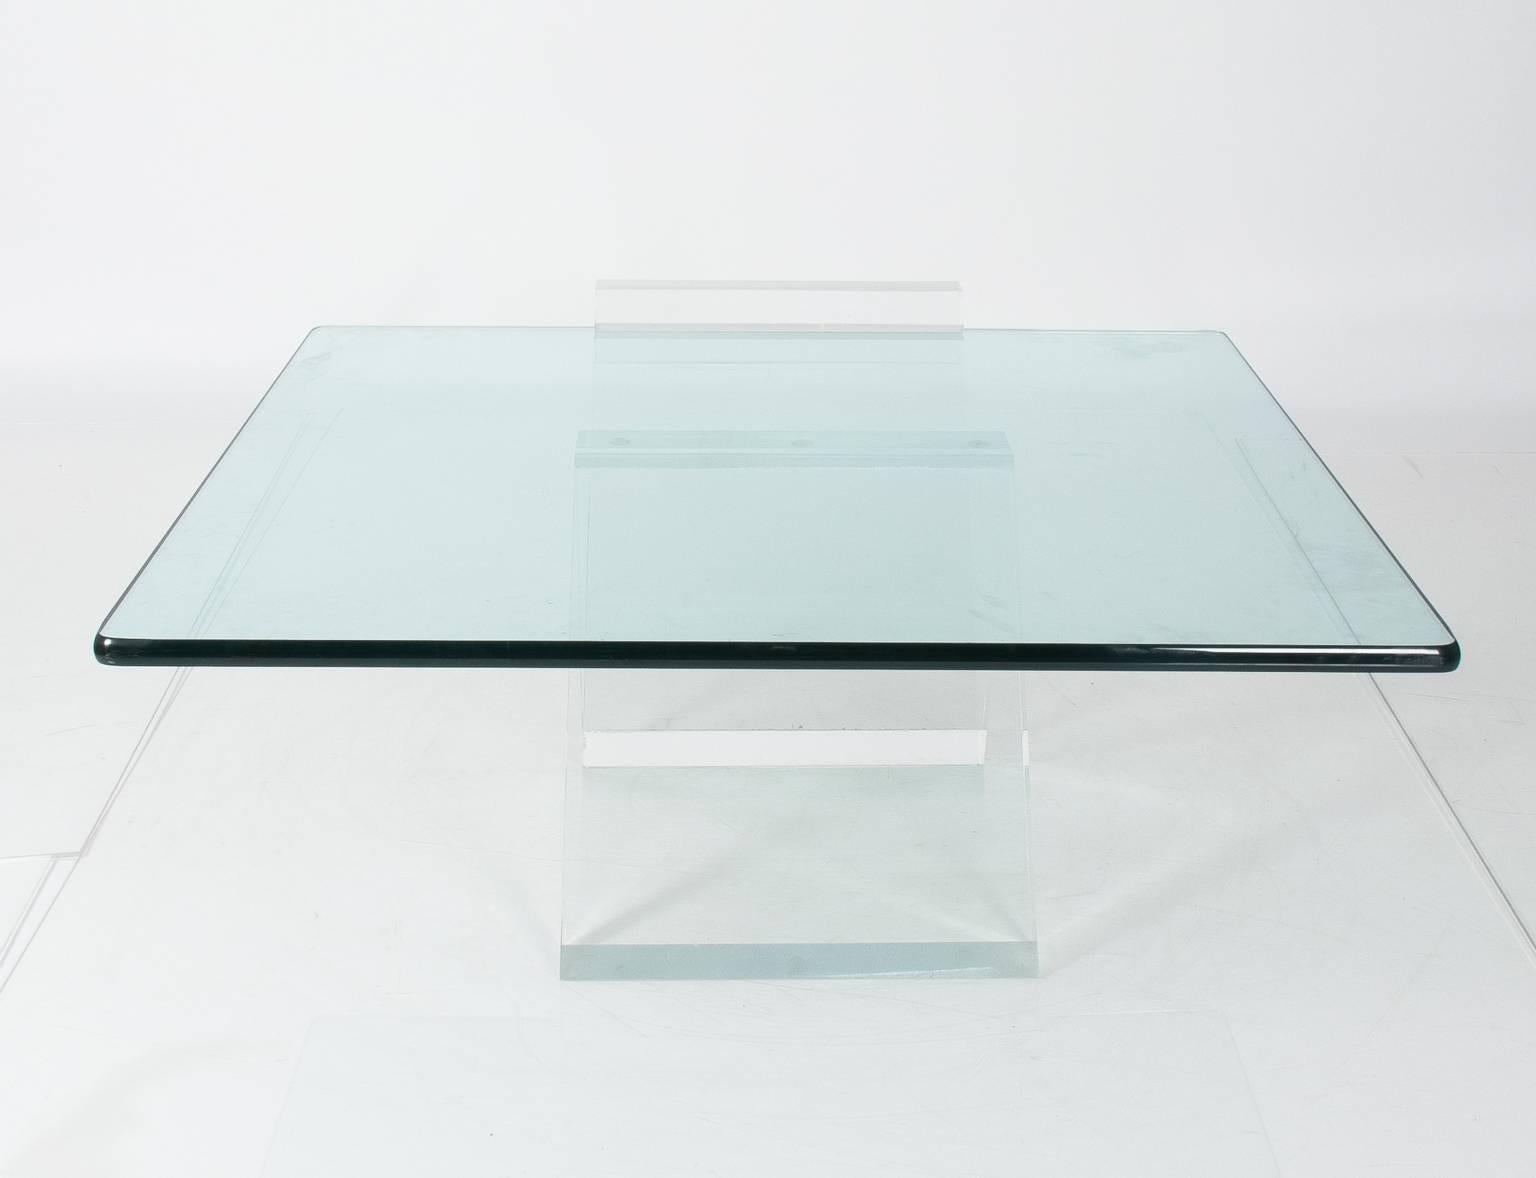 Mid-20th century modern glass table.
   